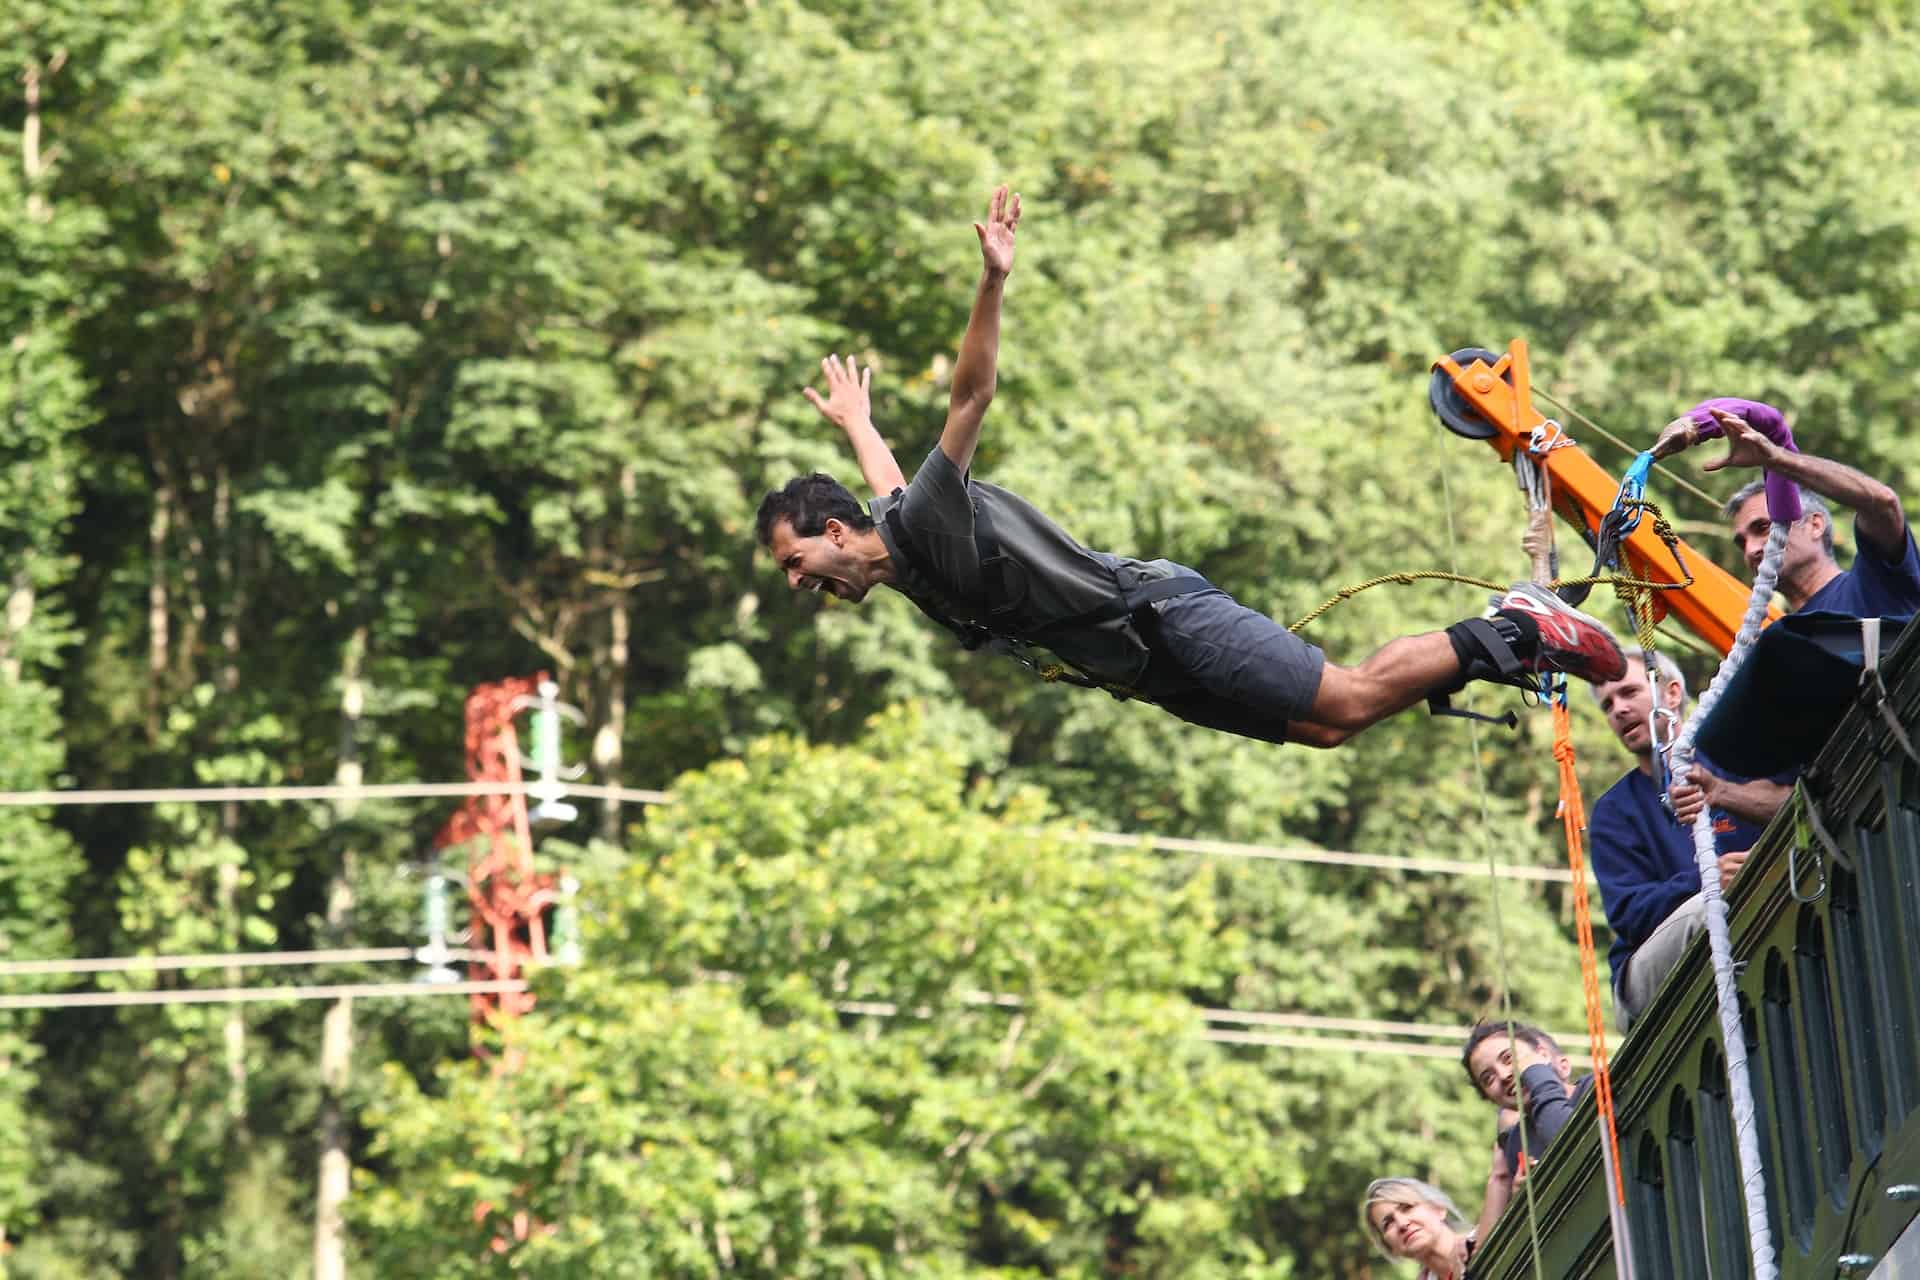 Launching into the air and bungee-run – non-standard variations of bungee jumping